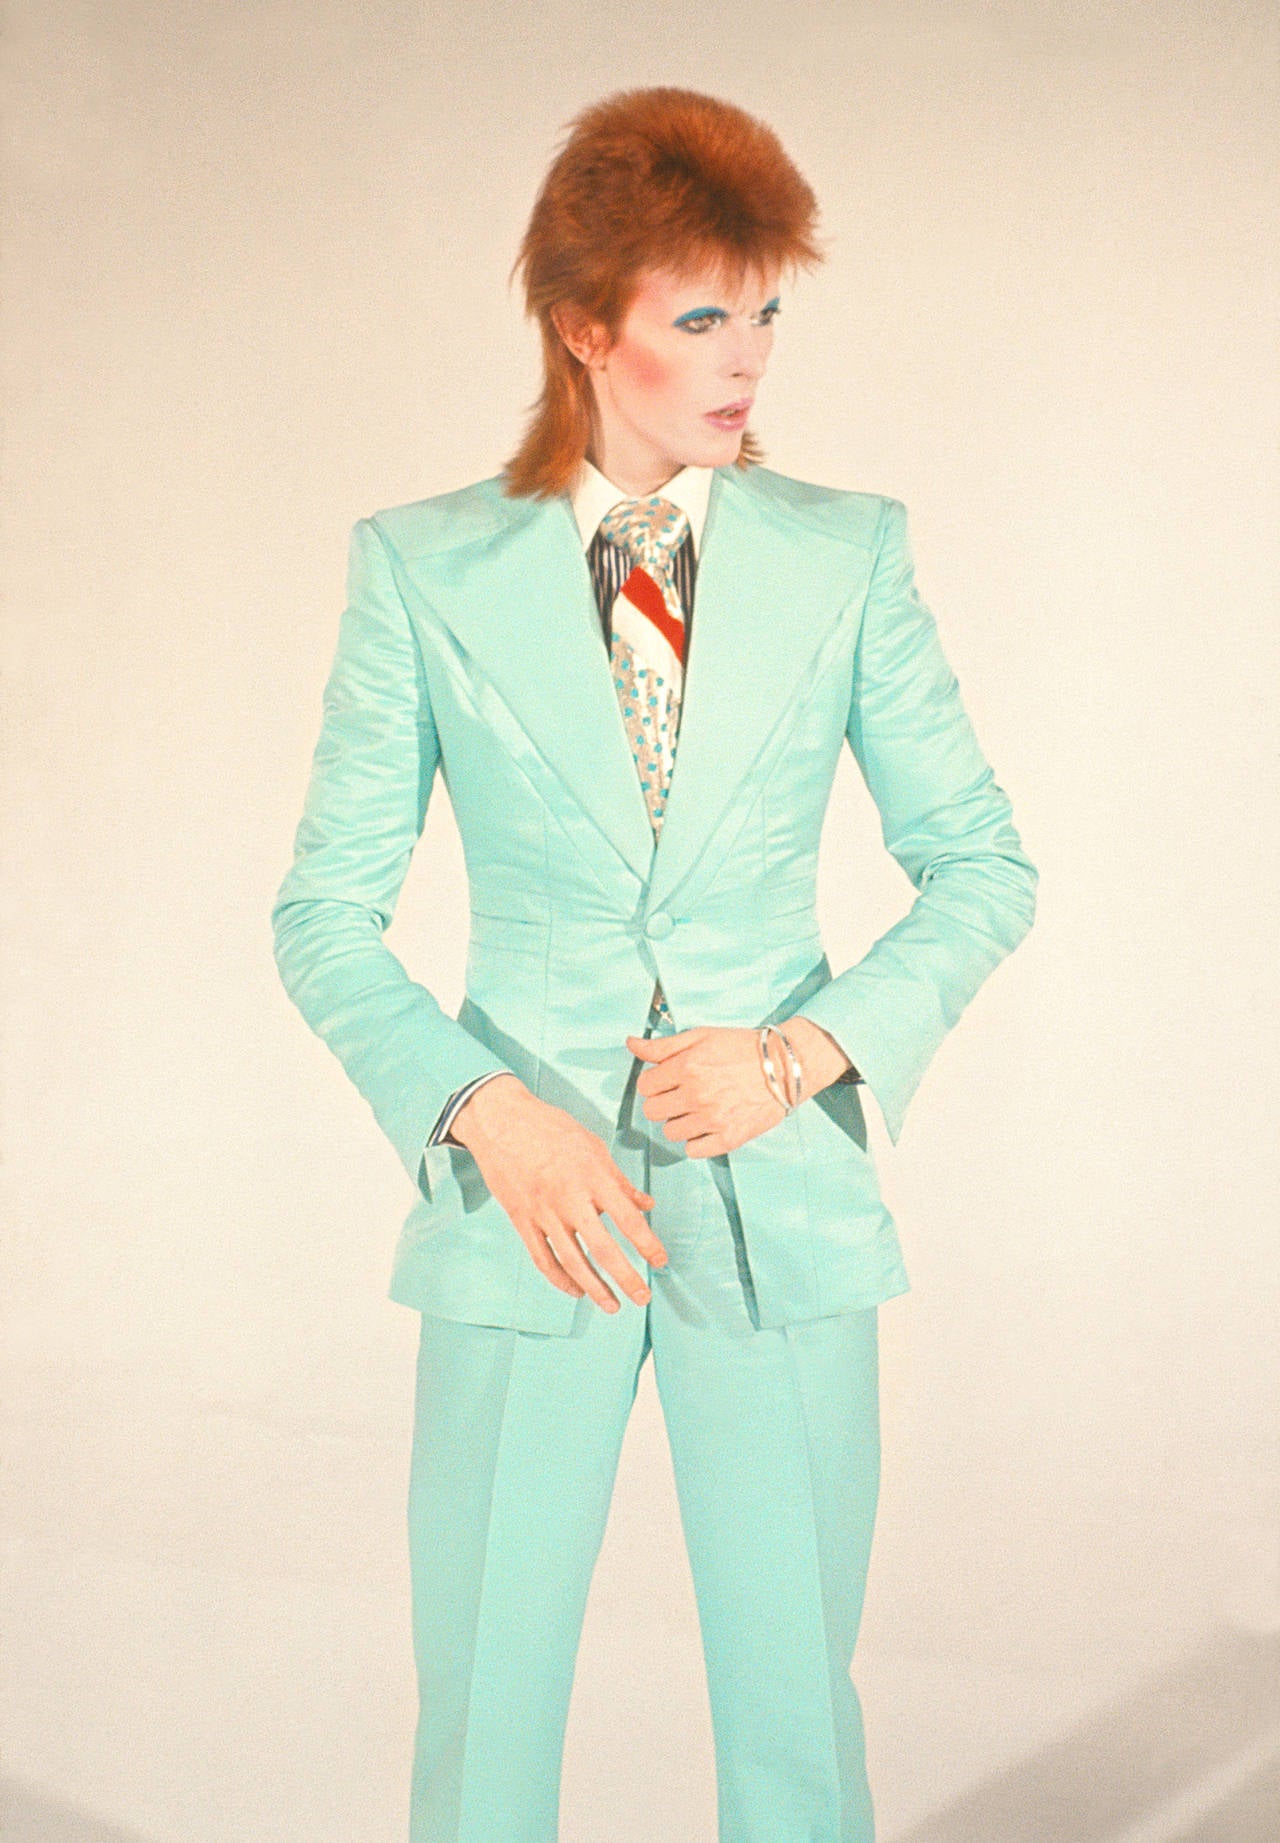 Mick Rock Figurative Photograph - Bowie, Life on Mars